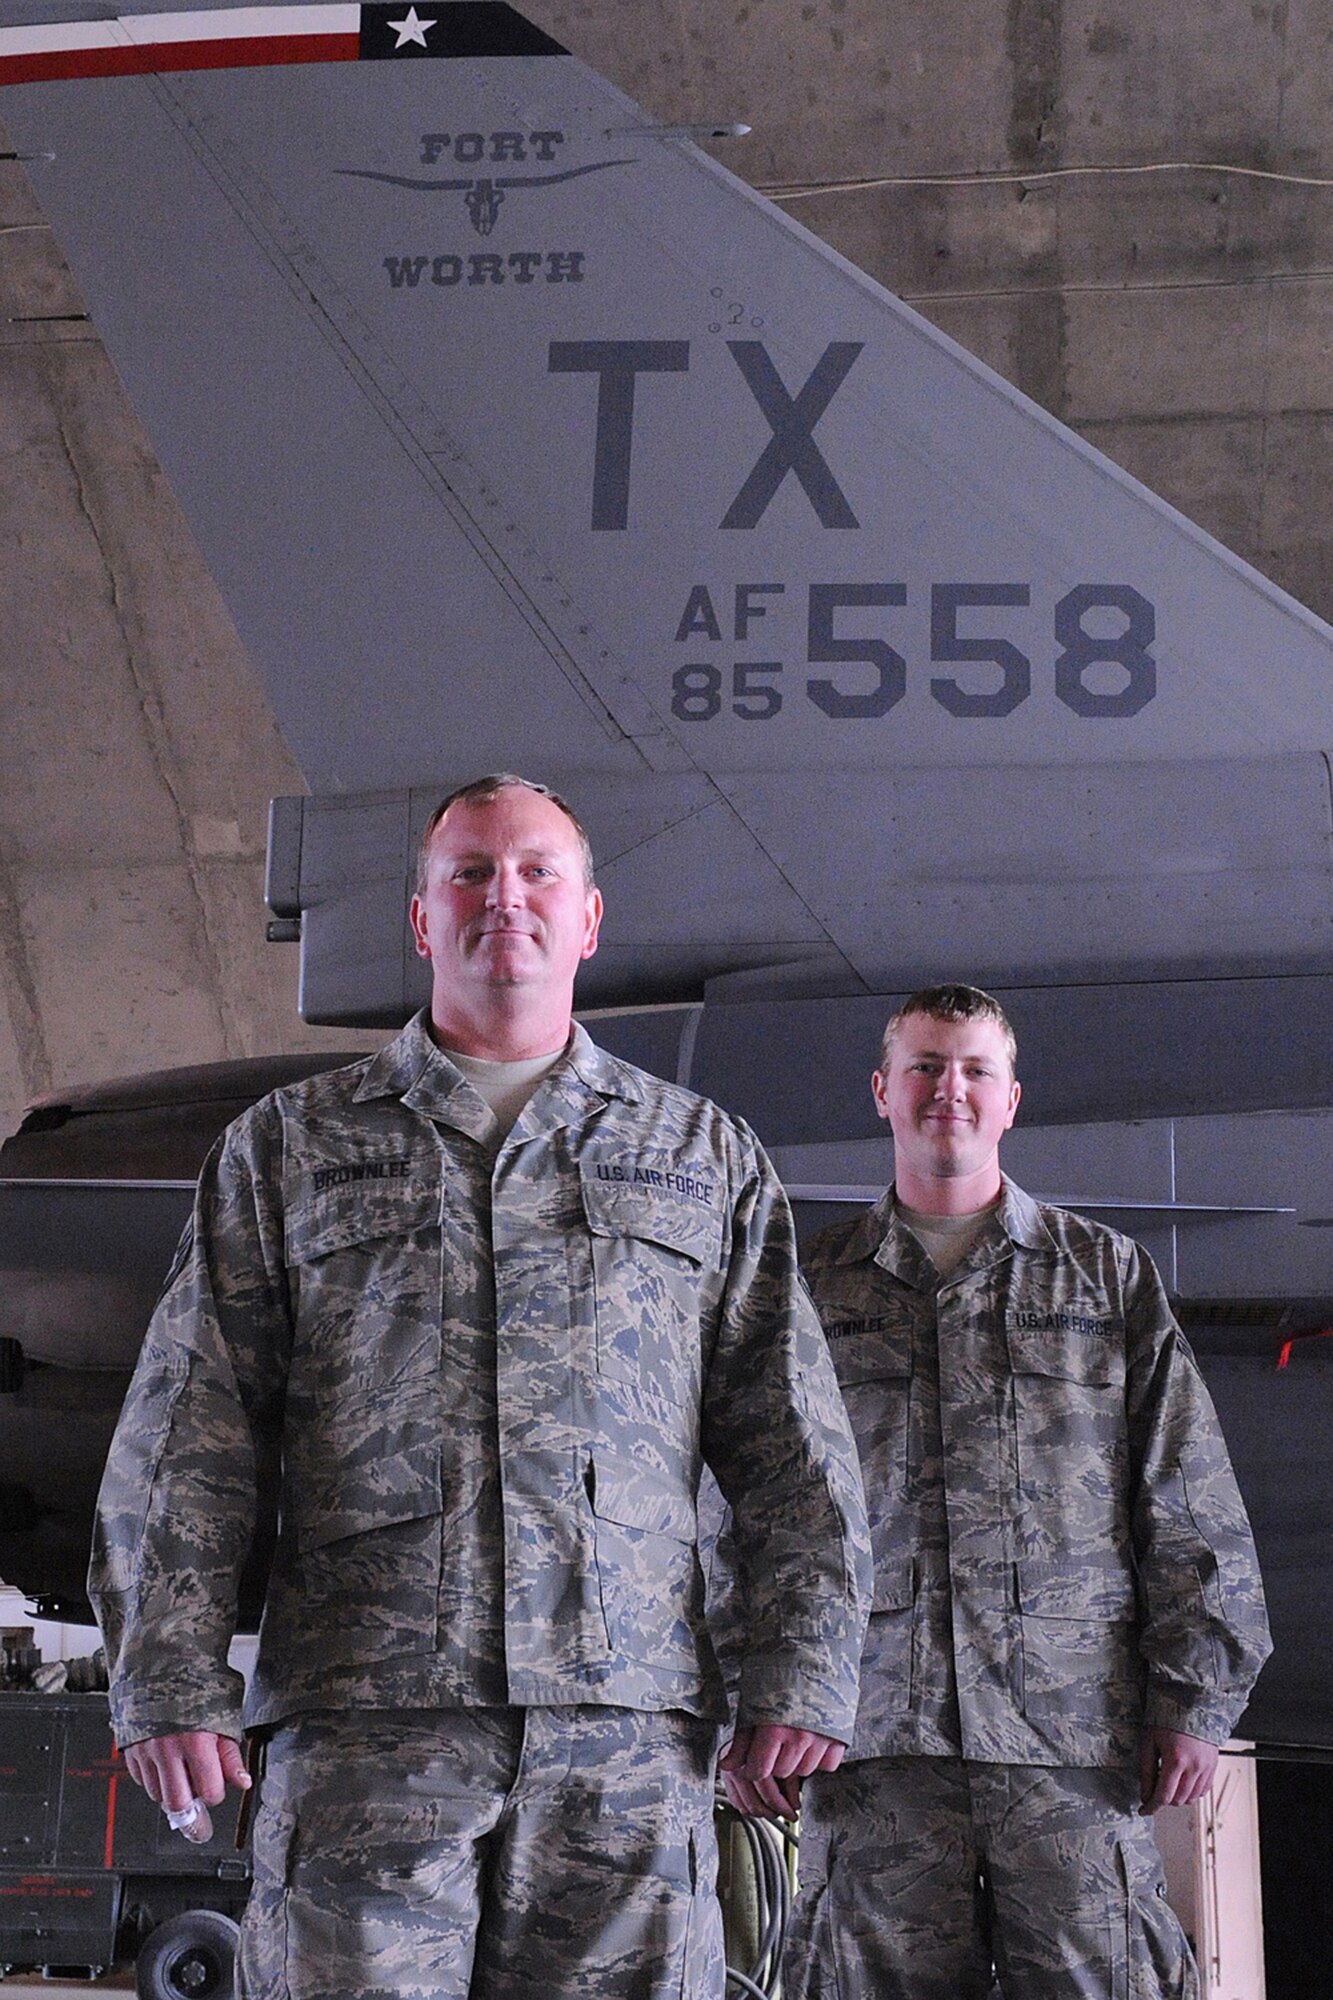 JOINT BASE BALAD, Iraq -- Air Force Reservists Master Sgt. Darrel Brownlee and his son, Senior Airman Kevin Brownlee, 332nd Aircraft Maintenance Squadron aircraft crew chiefs, stand together in front of an F-16 Falcon, here, Jan. 26. The father and son team are deployed from Fort Worth, Texas. (U.S. Air Force photo/Senior Airman Tiffany Trojca)